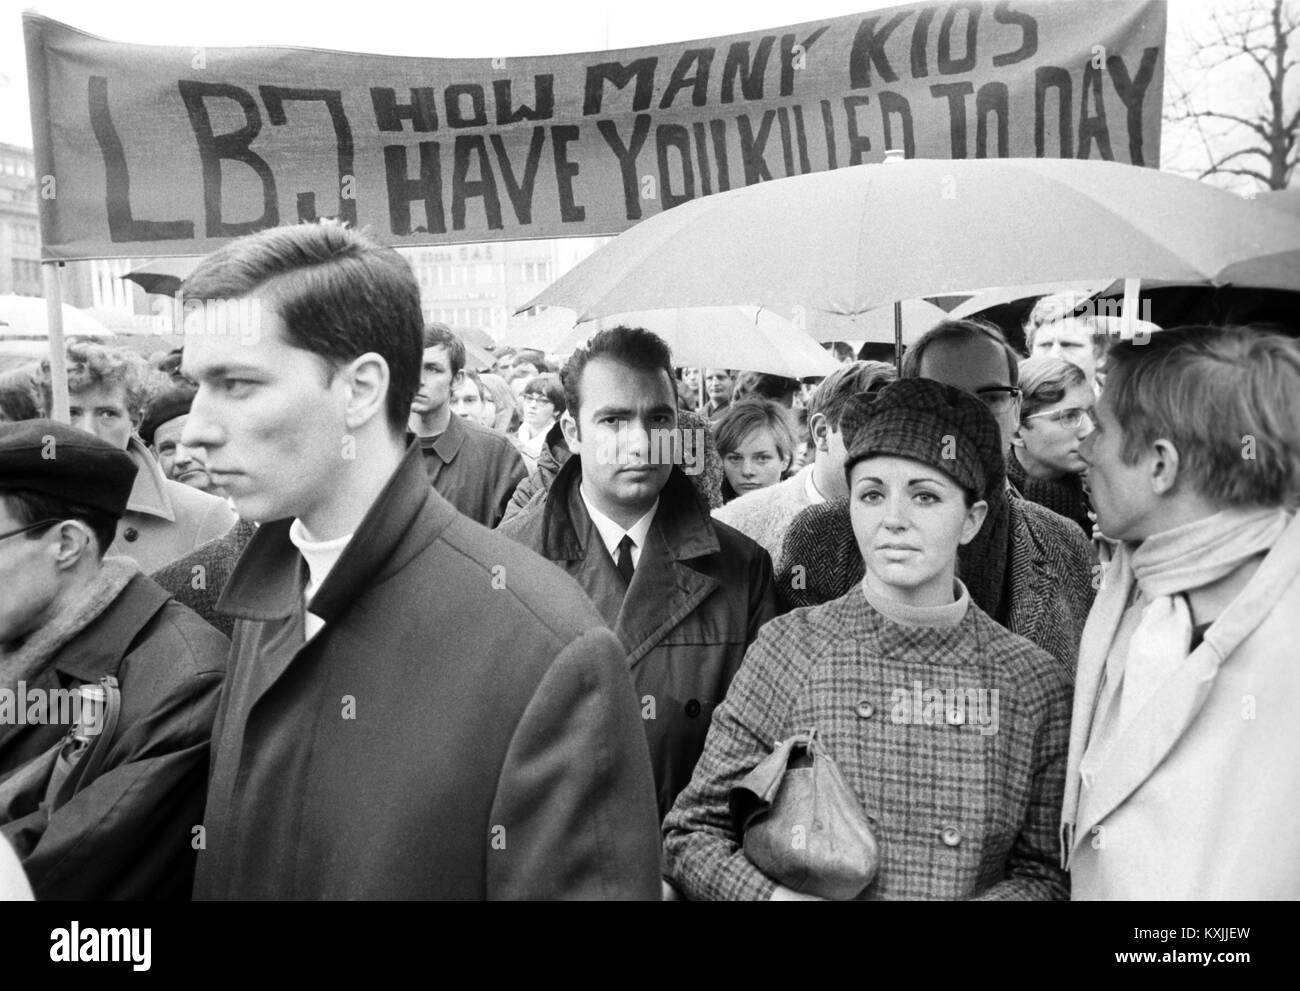 A banner asks US president Lyndon B. Johnson: 'L.B.J. How many kids have you killed today'. Around 1,000 people have gathered at Wittenbergplatz in Berlin to demonstrate against Vietnam War on 23 March 1968. | usage worldwide Stock Photo